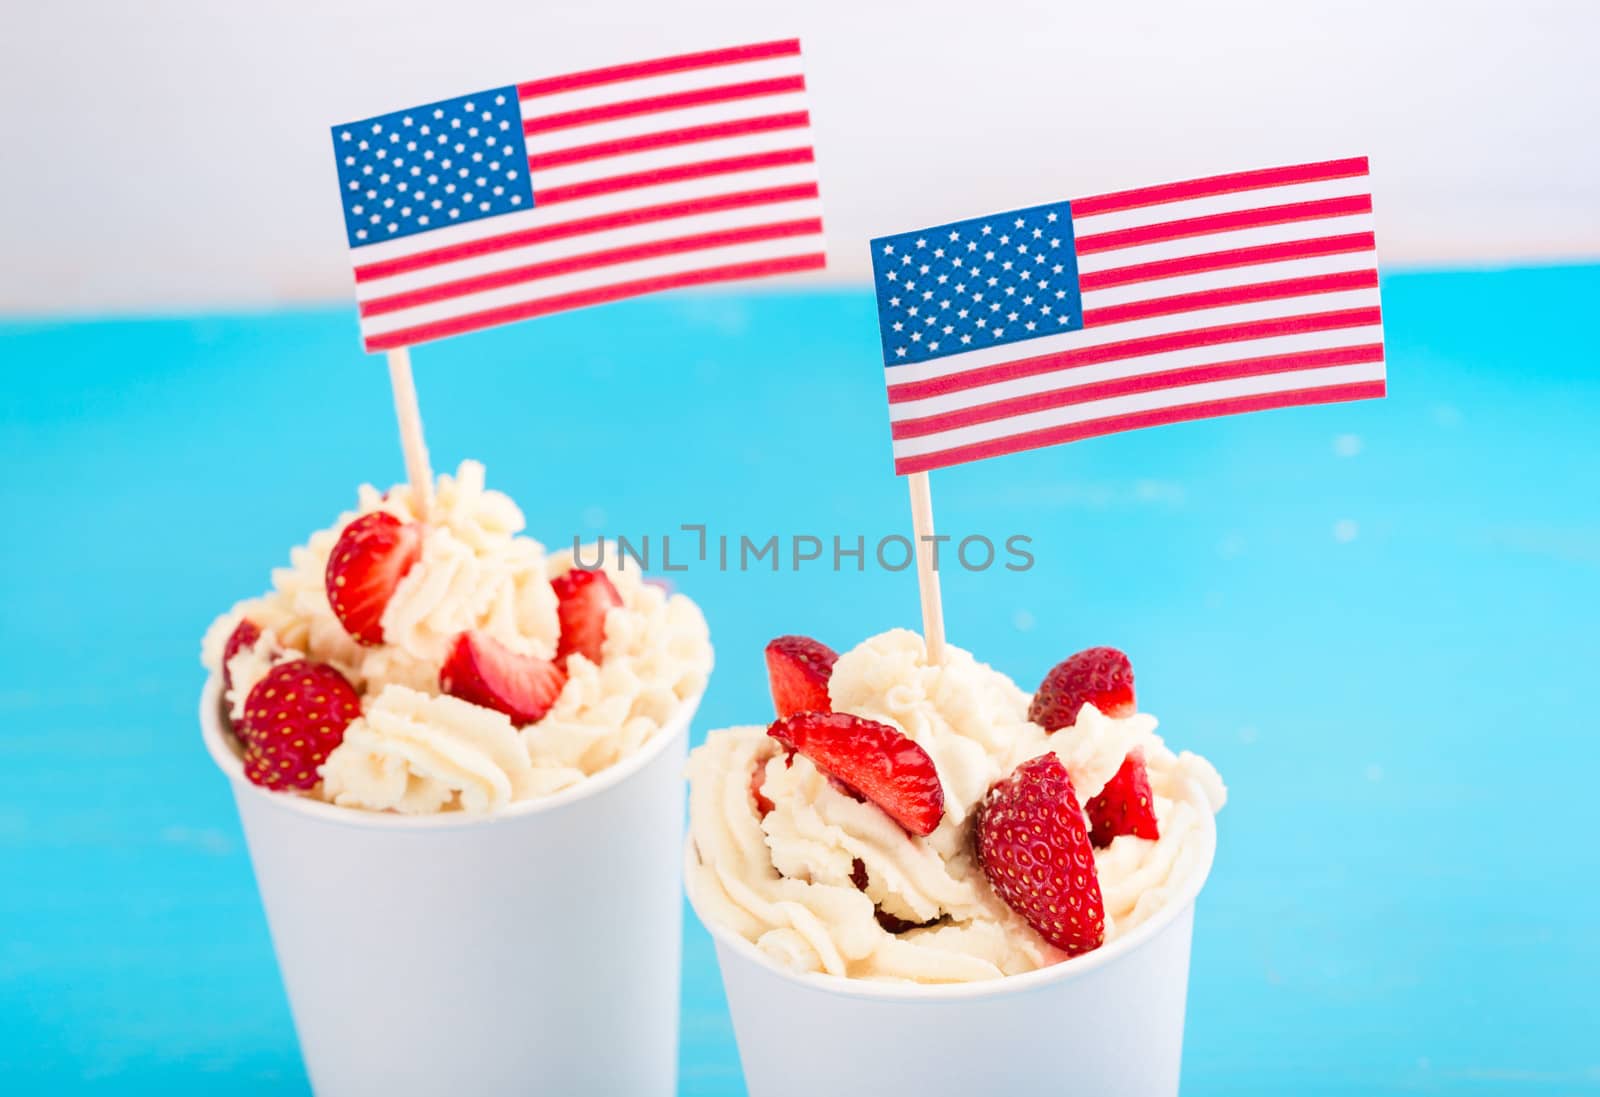 Two dessert of strawberries and whipped cream in a paper cup with American flags, greeting concept for Independence Day of America, the day of the American flag